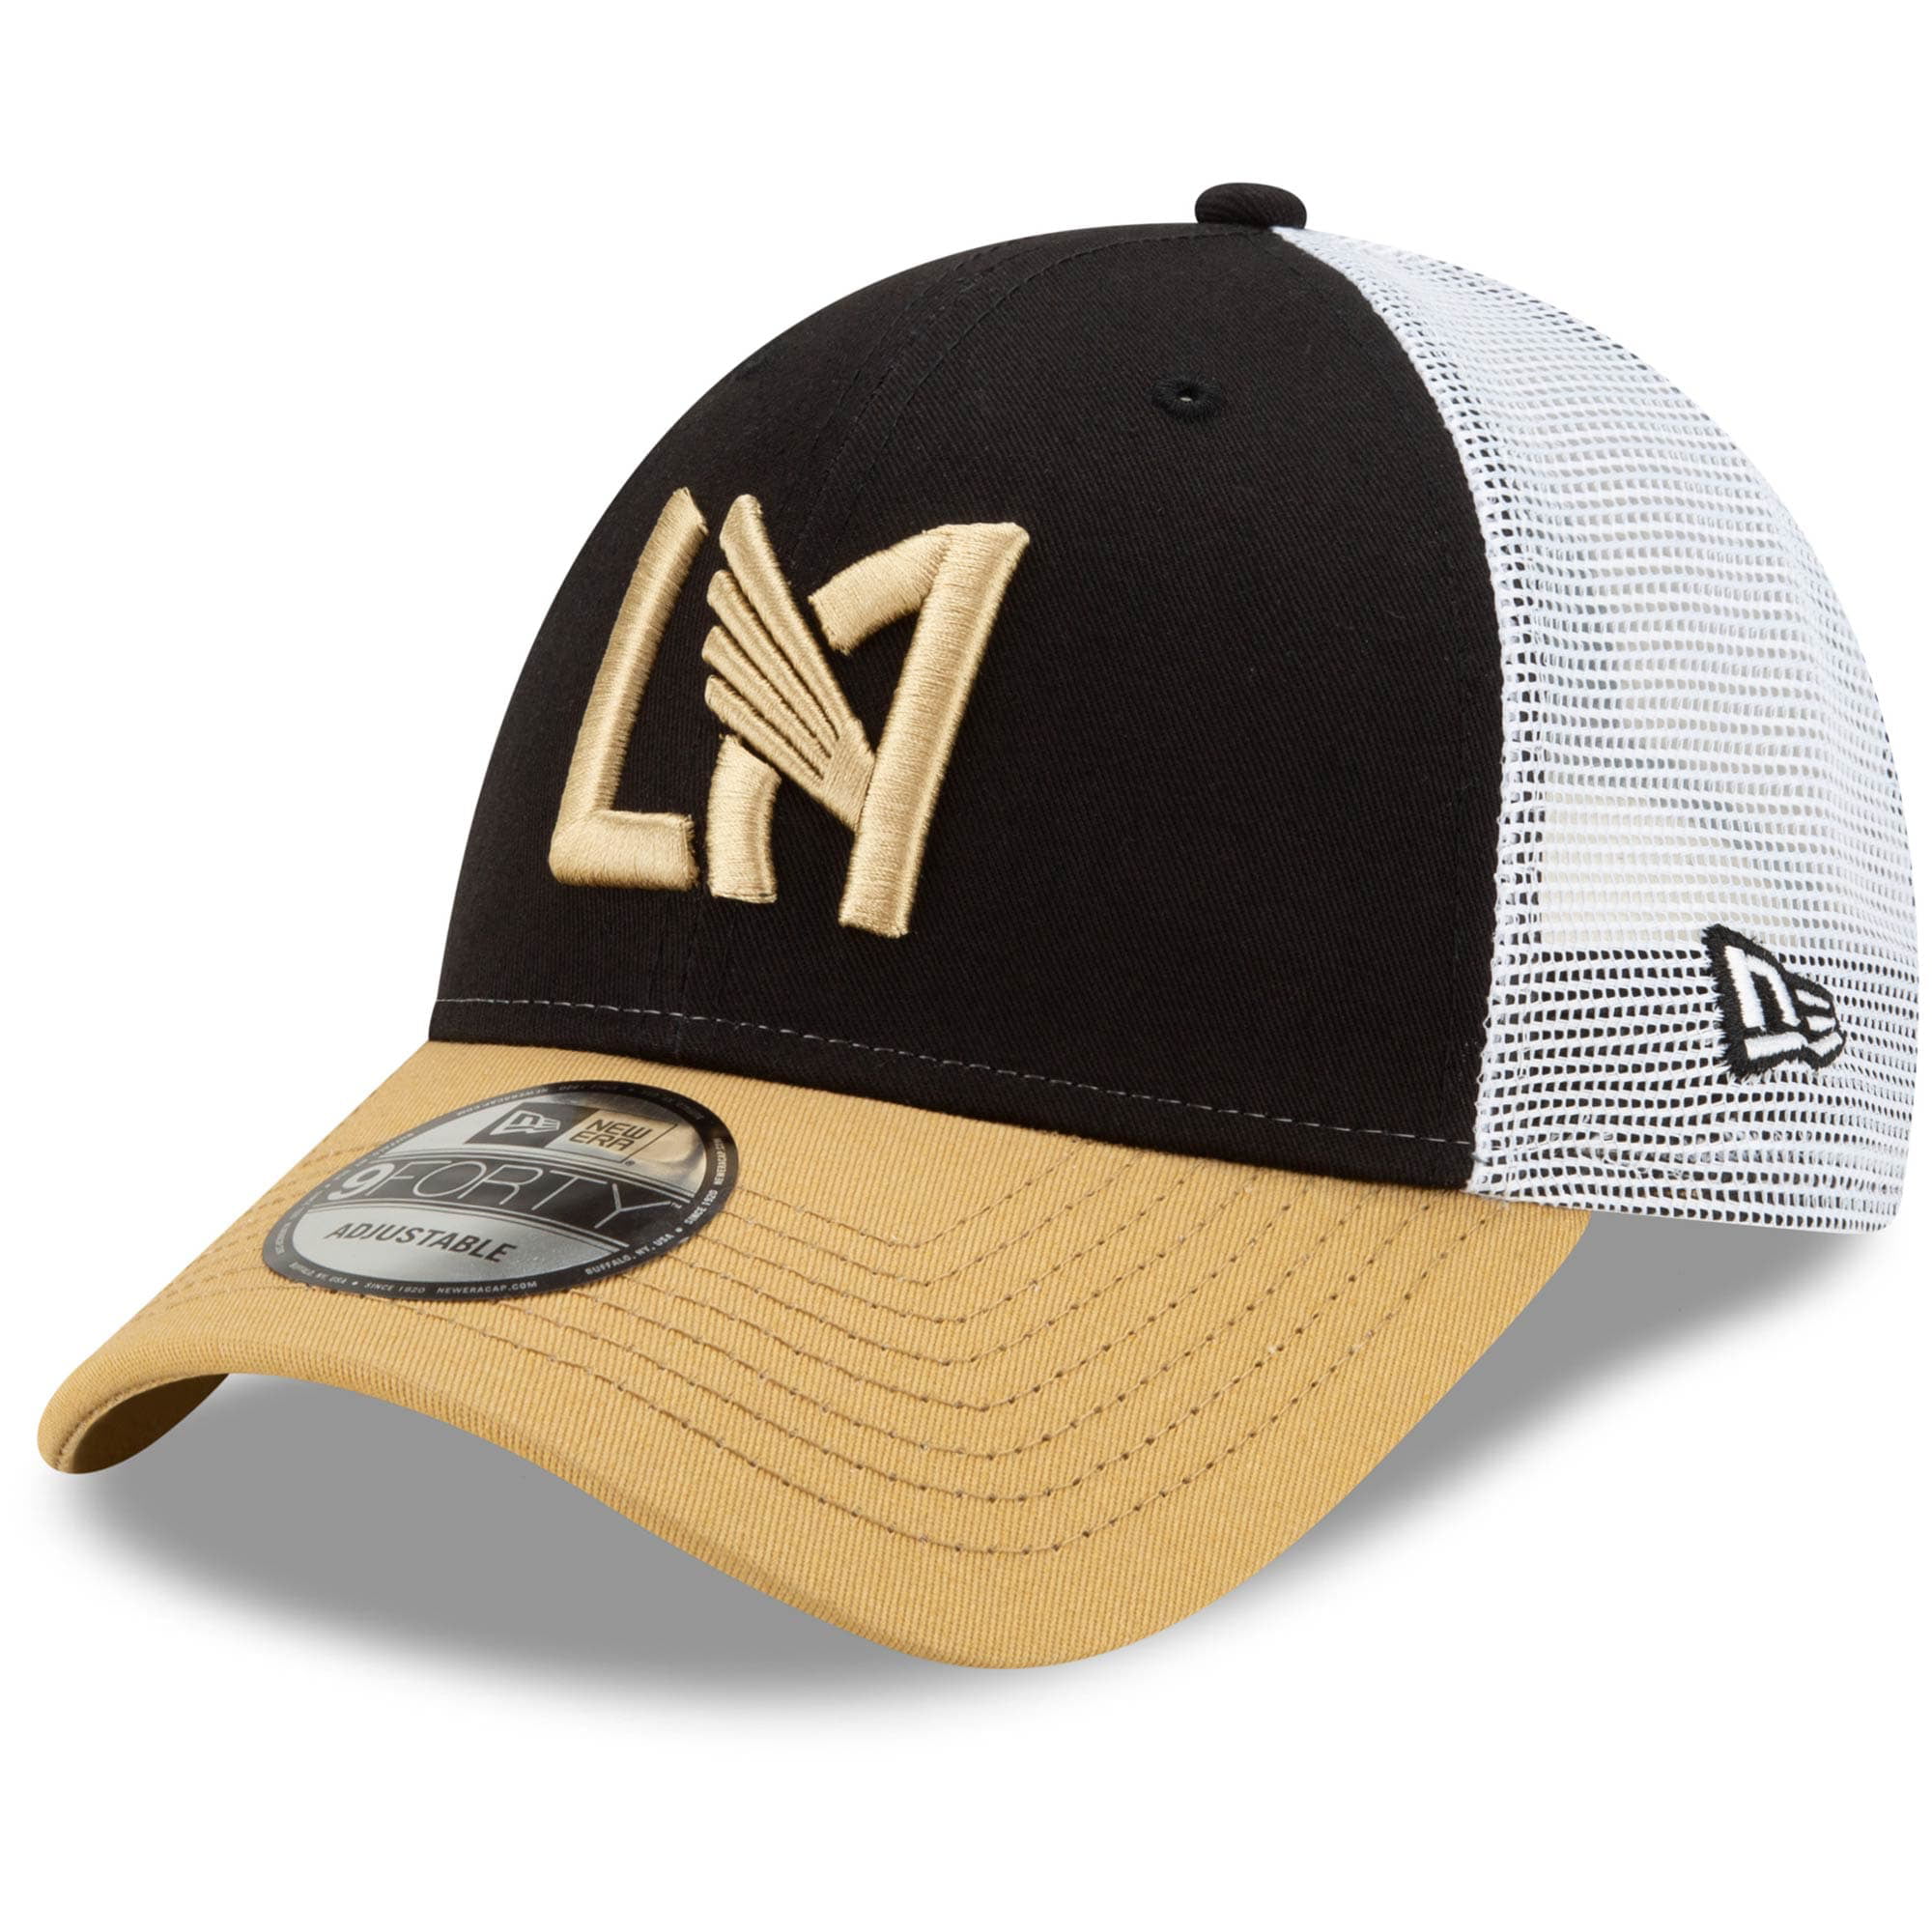 Embroidered 3D Puff DisneyLA LAFC LAFC inspired Los Angeles Soccer hat